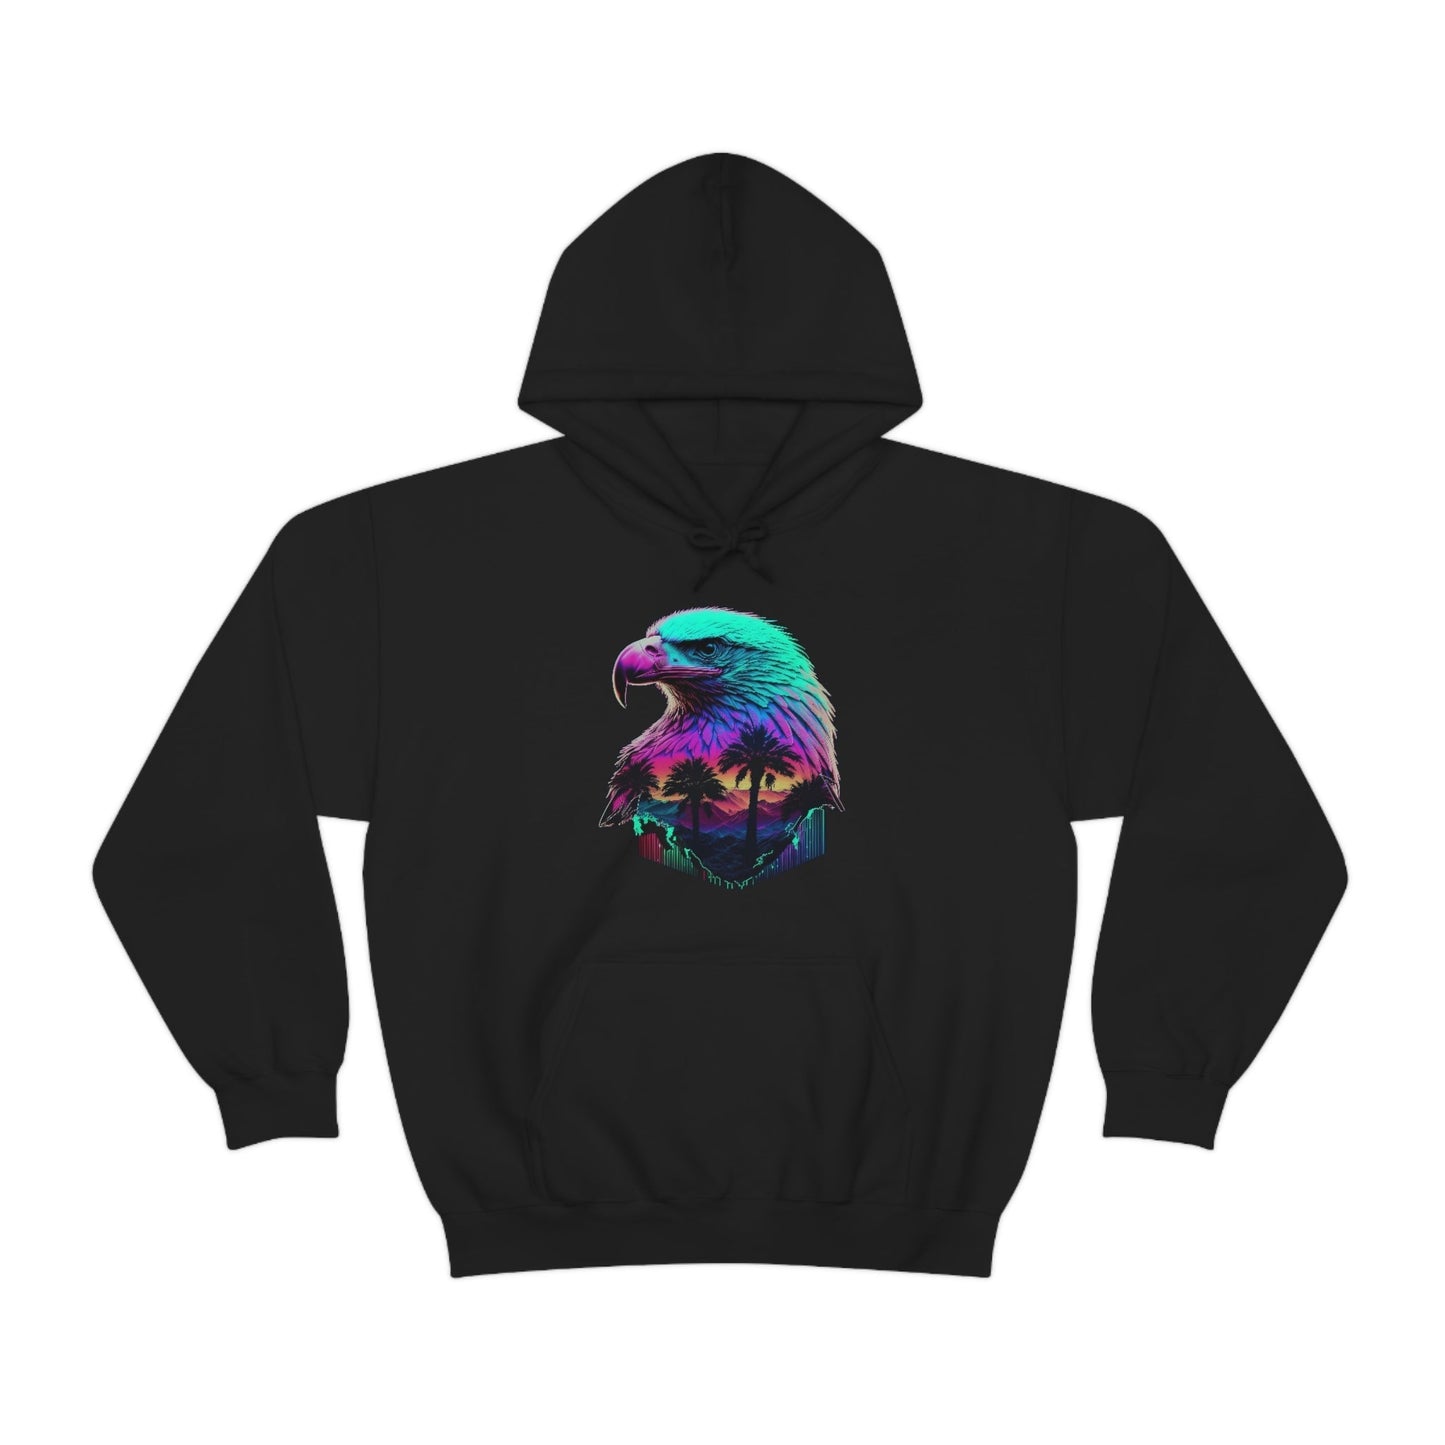 Womens and Mens Patriotic Hoodies - Land of the Vapor, Home of the Wave - Bind on Equip - 18155790579356176296